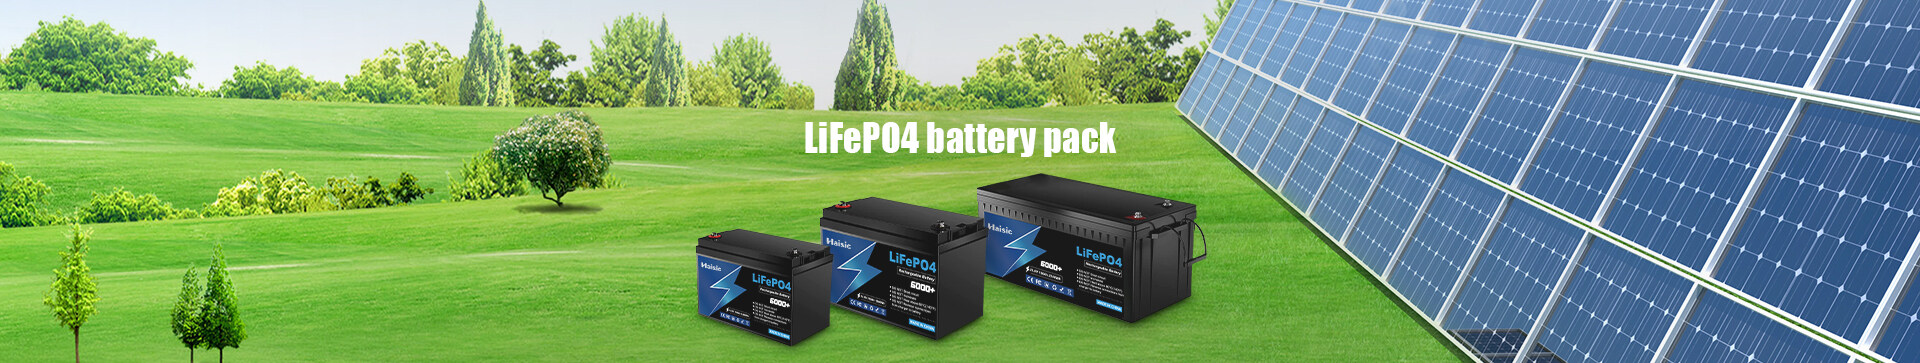 supplier lifepo4 lithium ion battery odm, supplier lifepo4 lithium ion battery oem